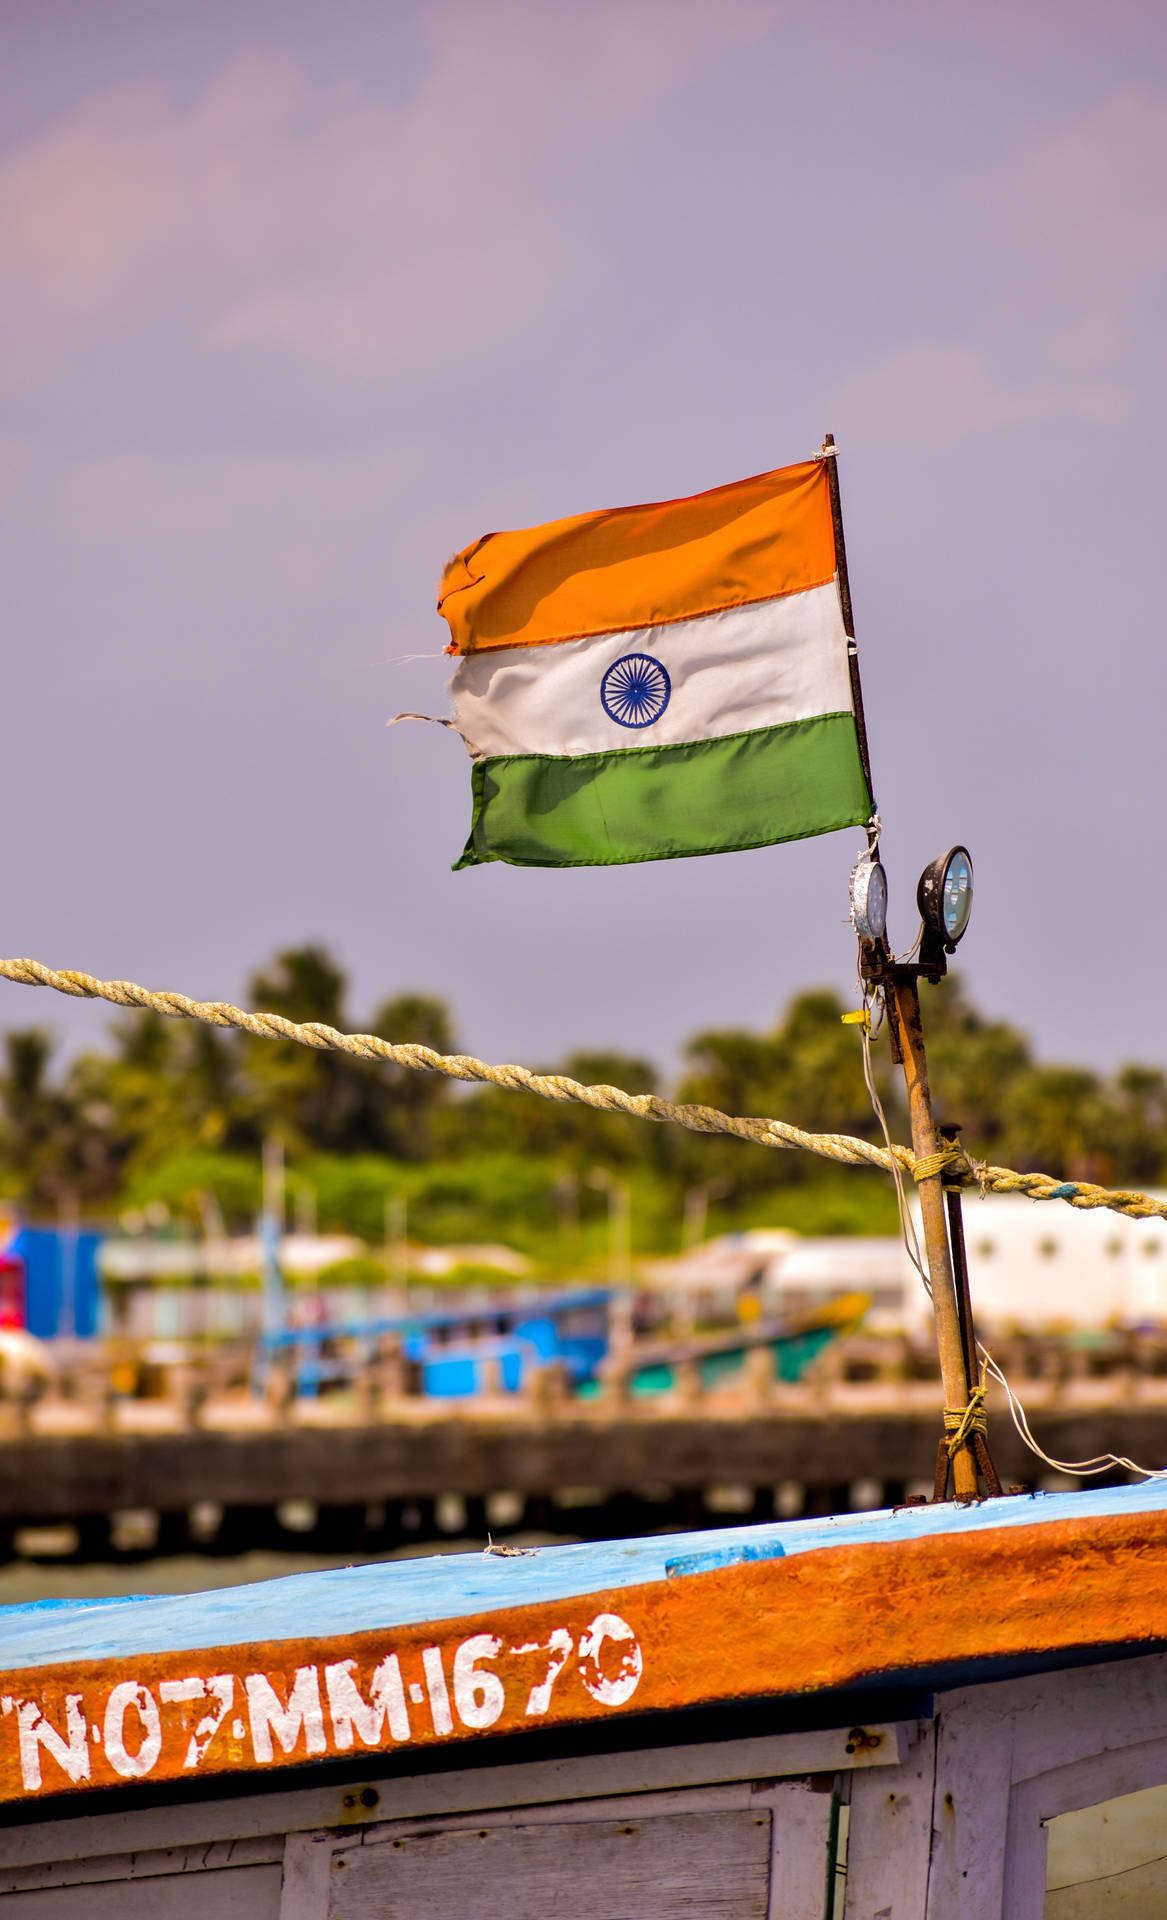 100+] Indian Flag 4k Wallpapers | Wallpapers.com